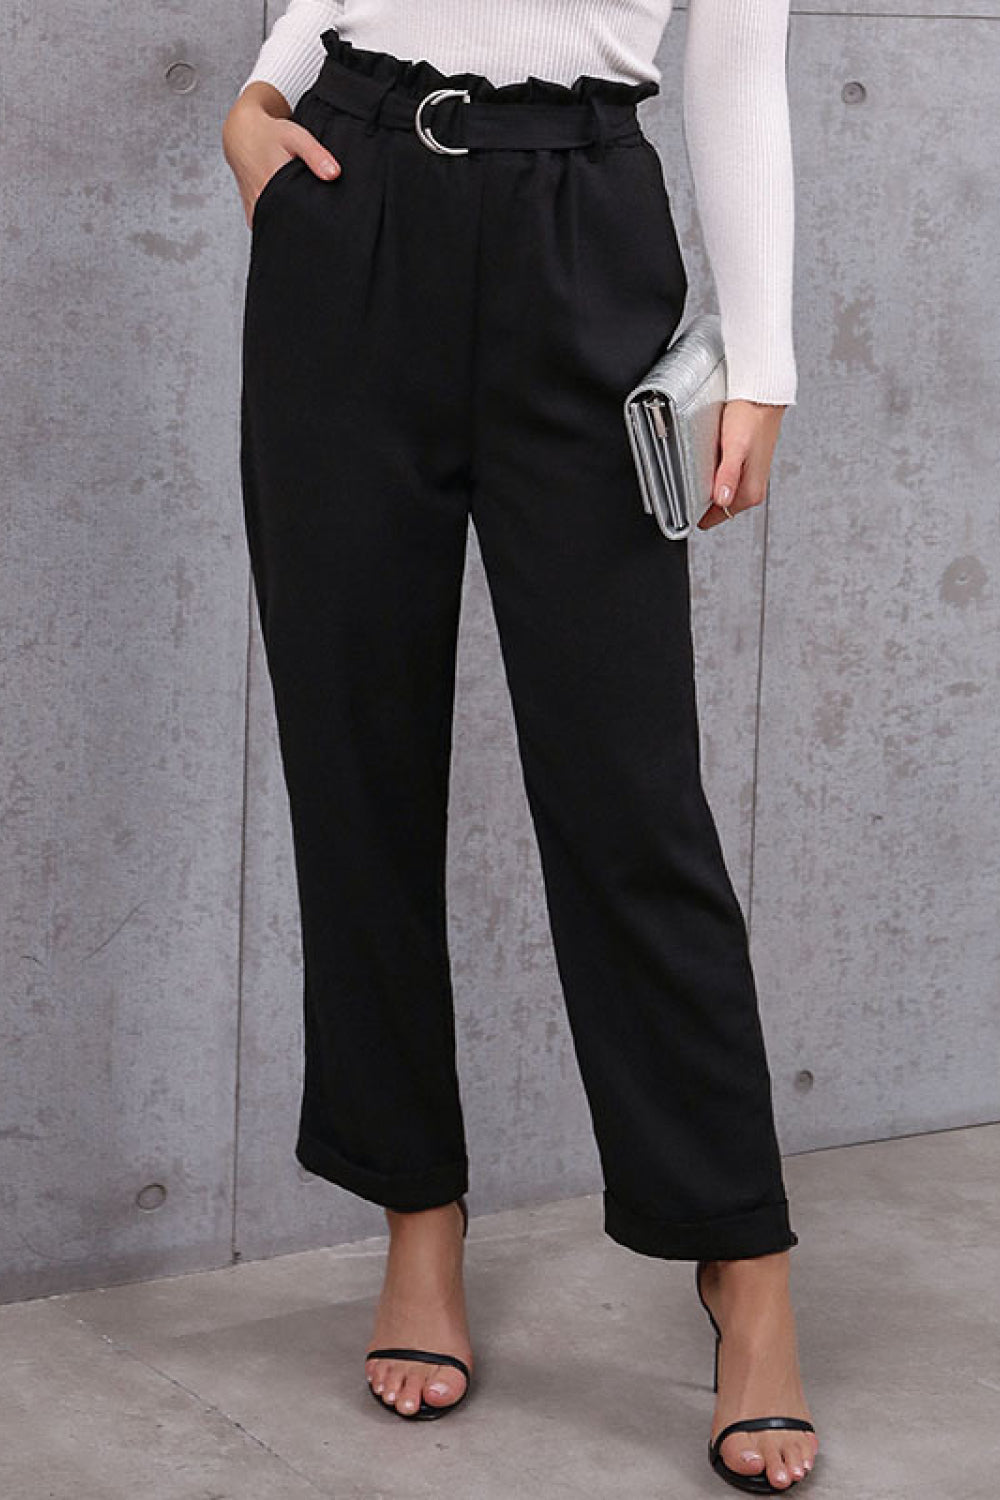 Belted Paperbag Waist Pants - Runway Frenzy